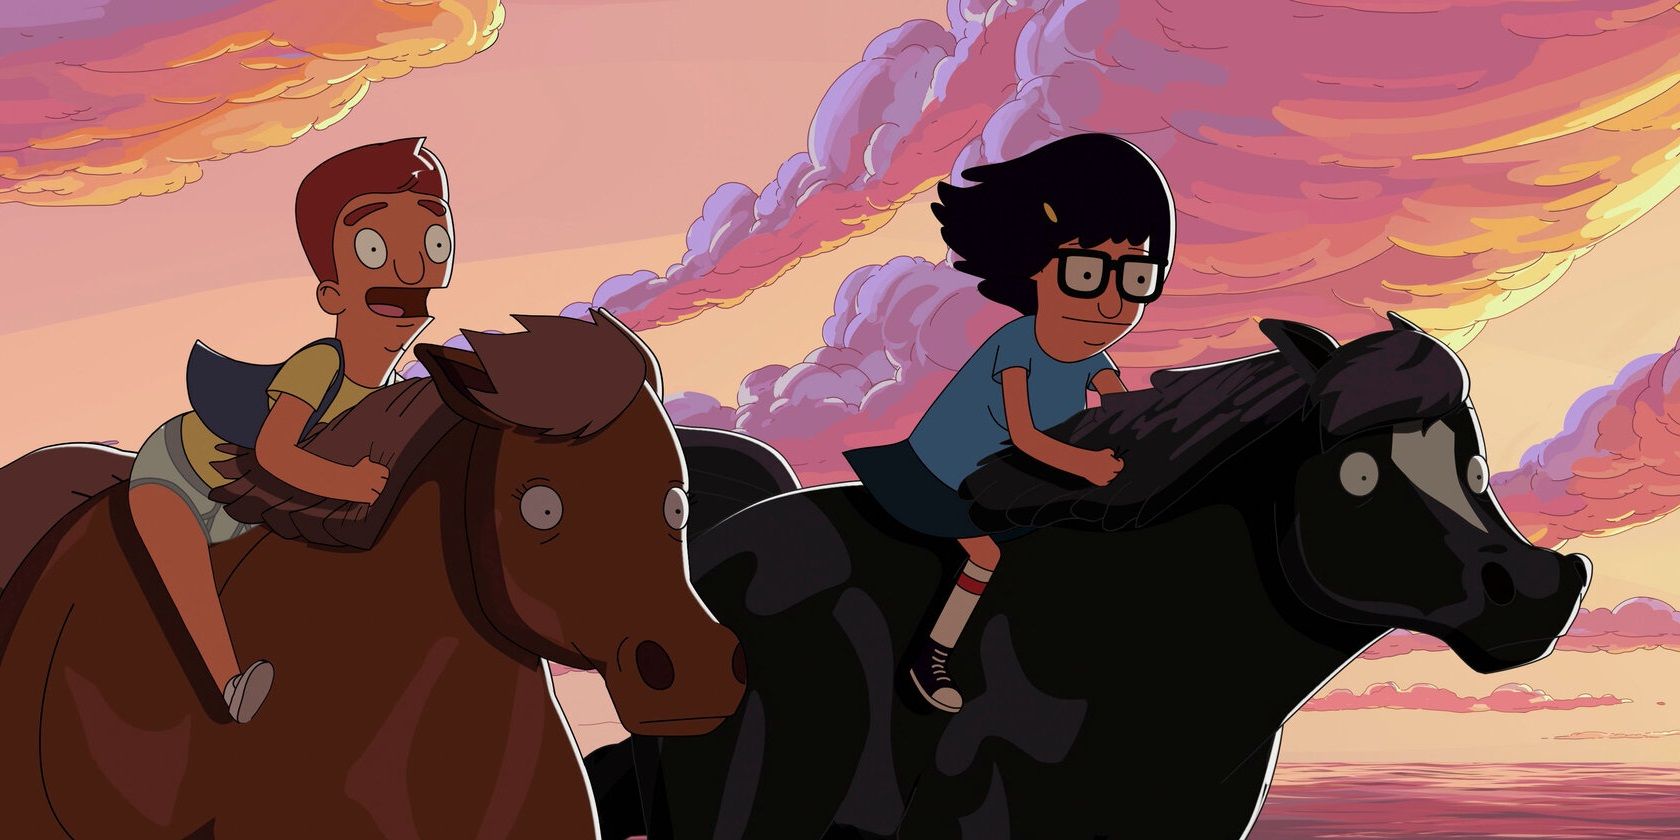 Tina and Jimmy Jr riding horses in Tina's dream in The Bob's Burgers Movie